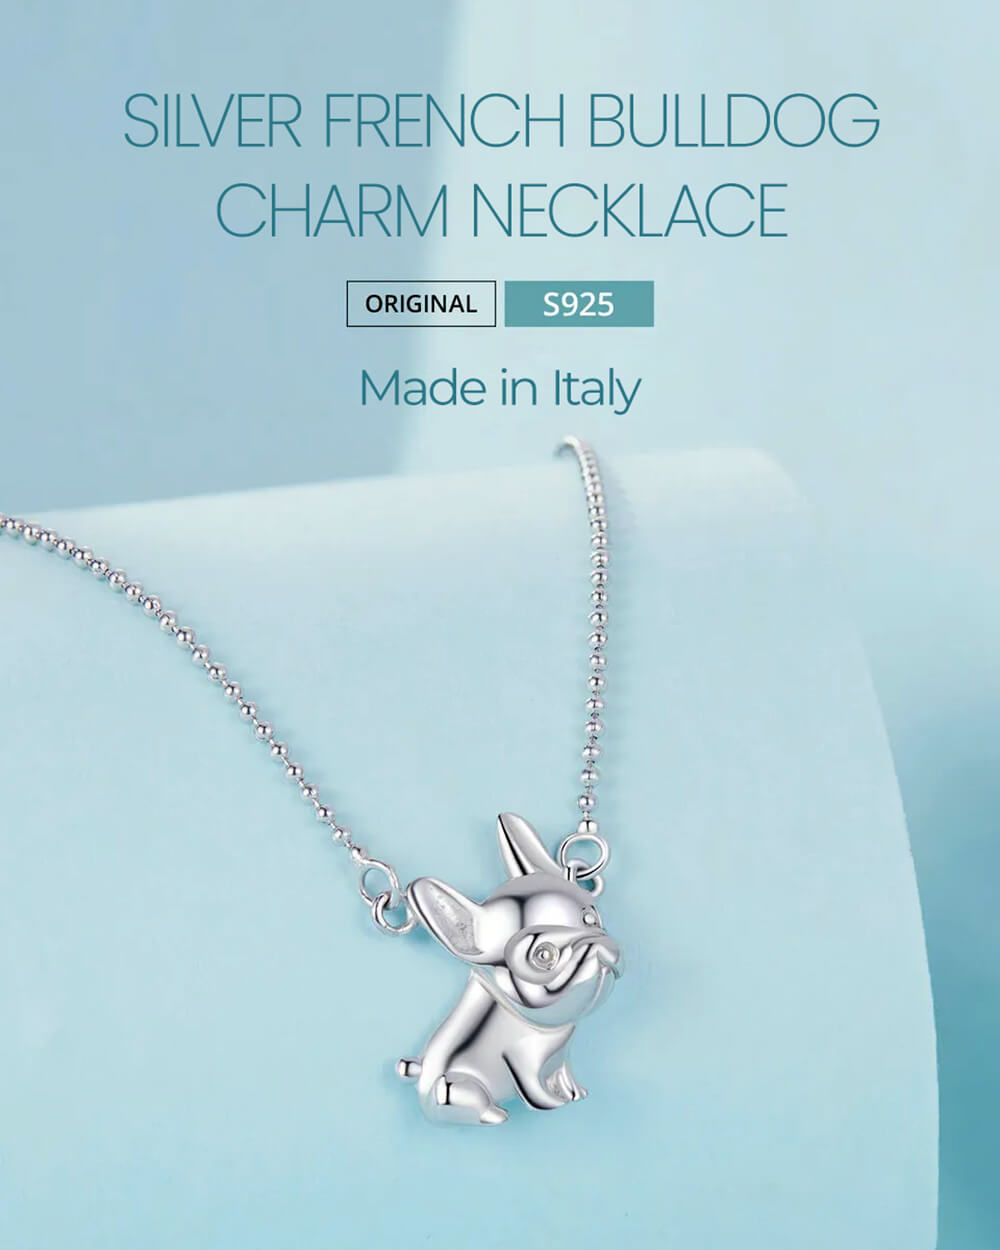 Product shot of the Silver French Bulldog Charm Necklace on the pastel blue product display